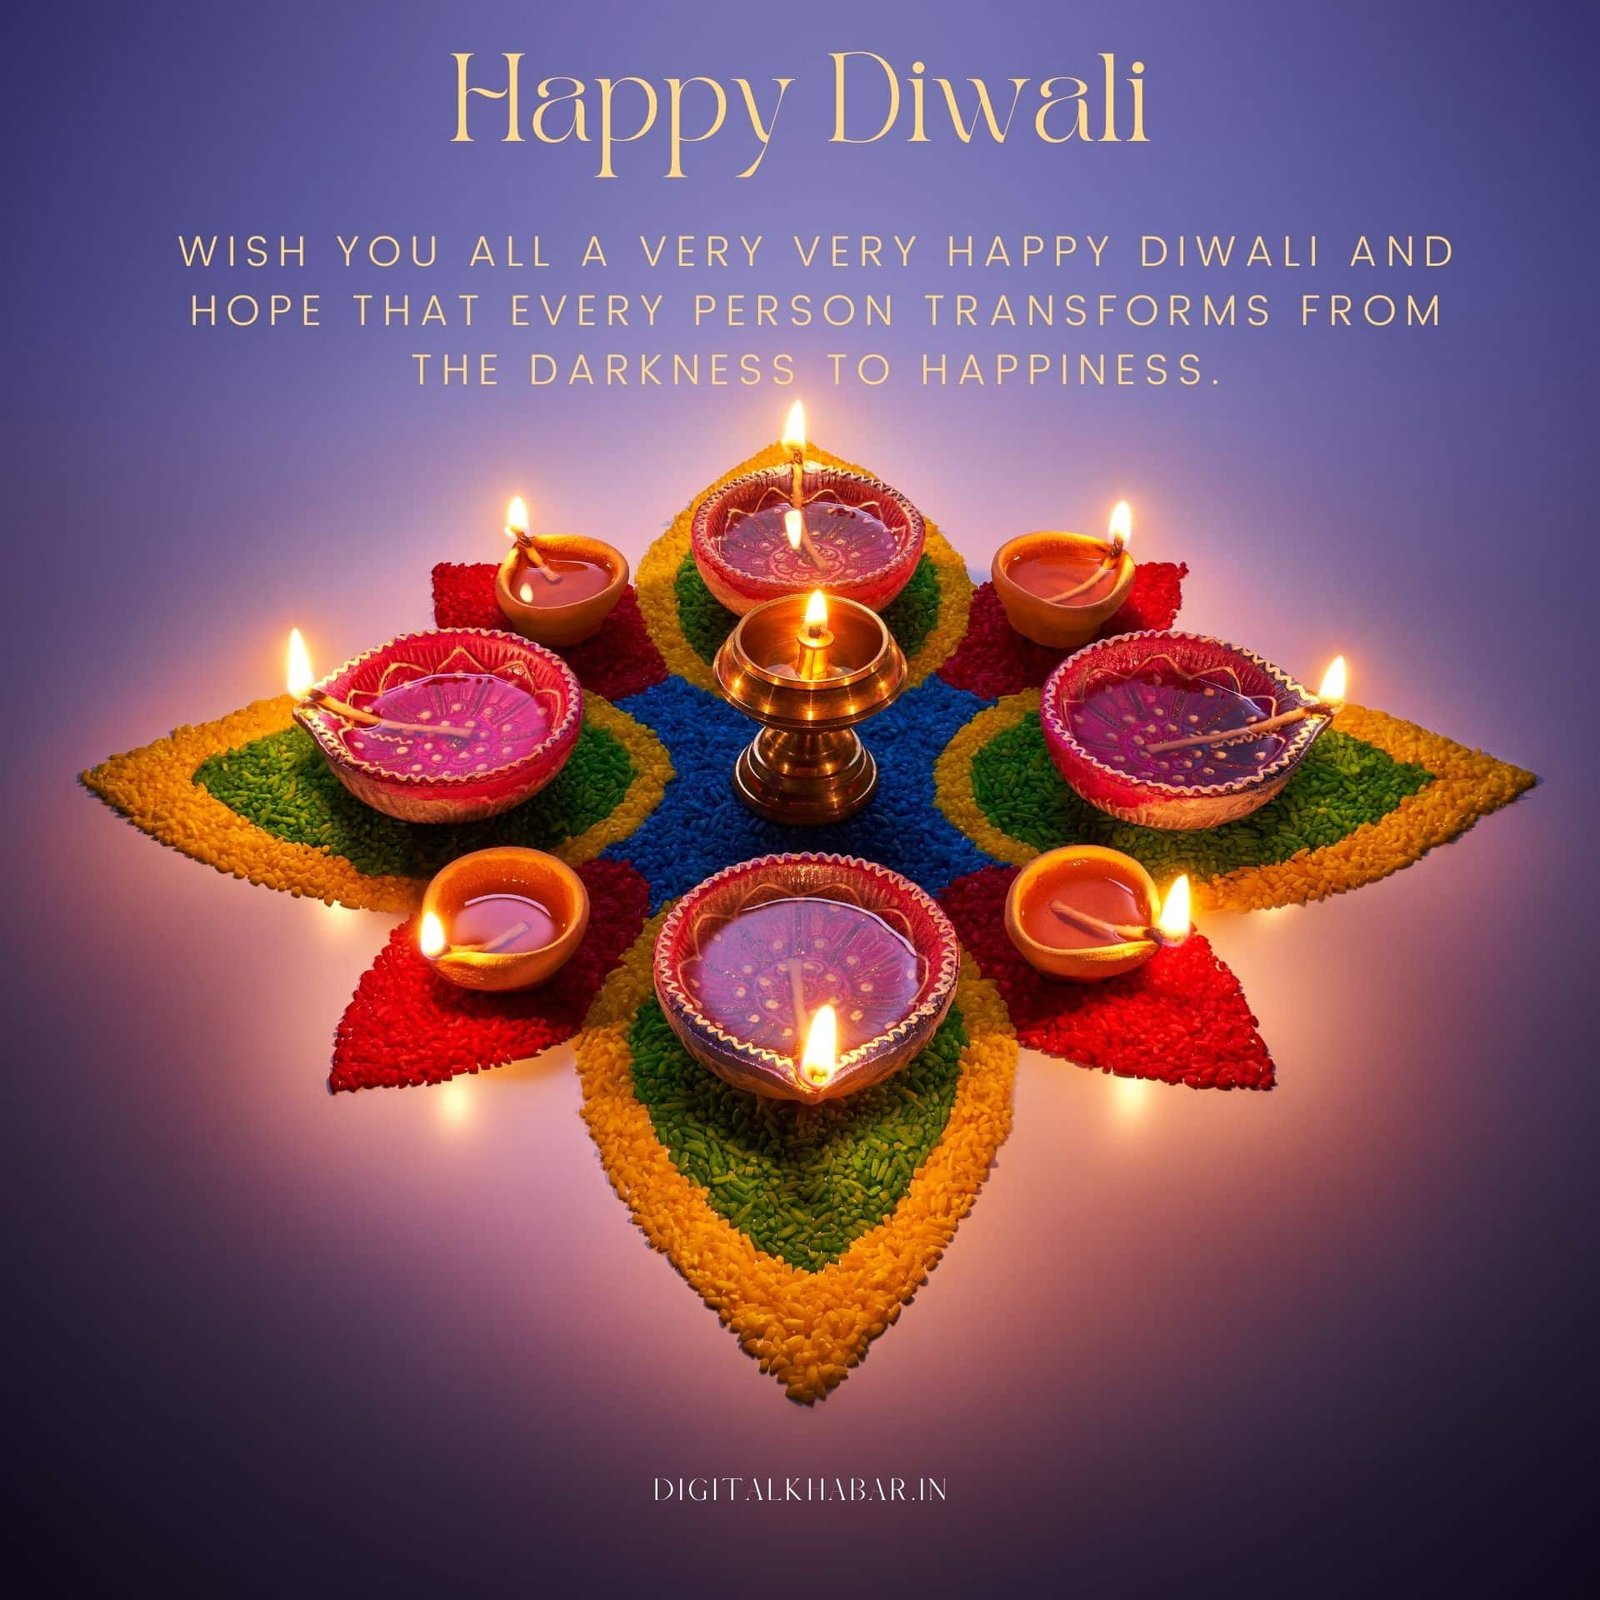 diwali images hd with quotes for whatsapp